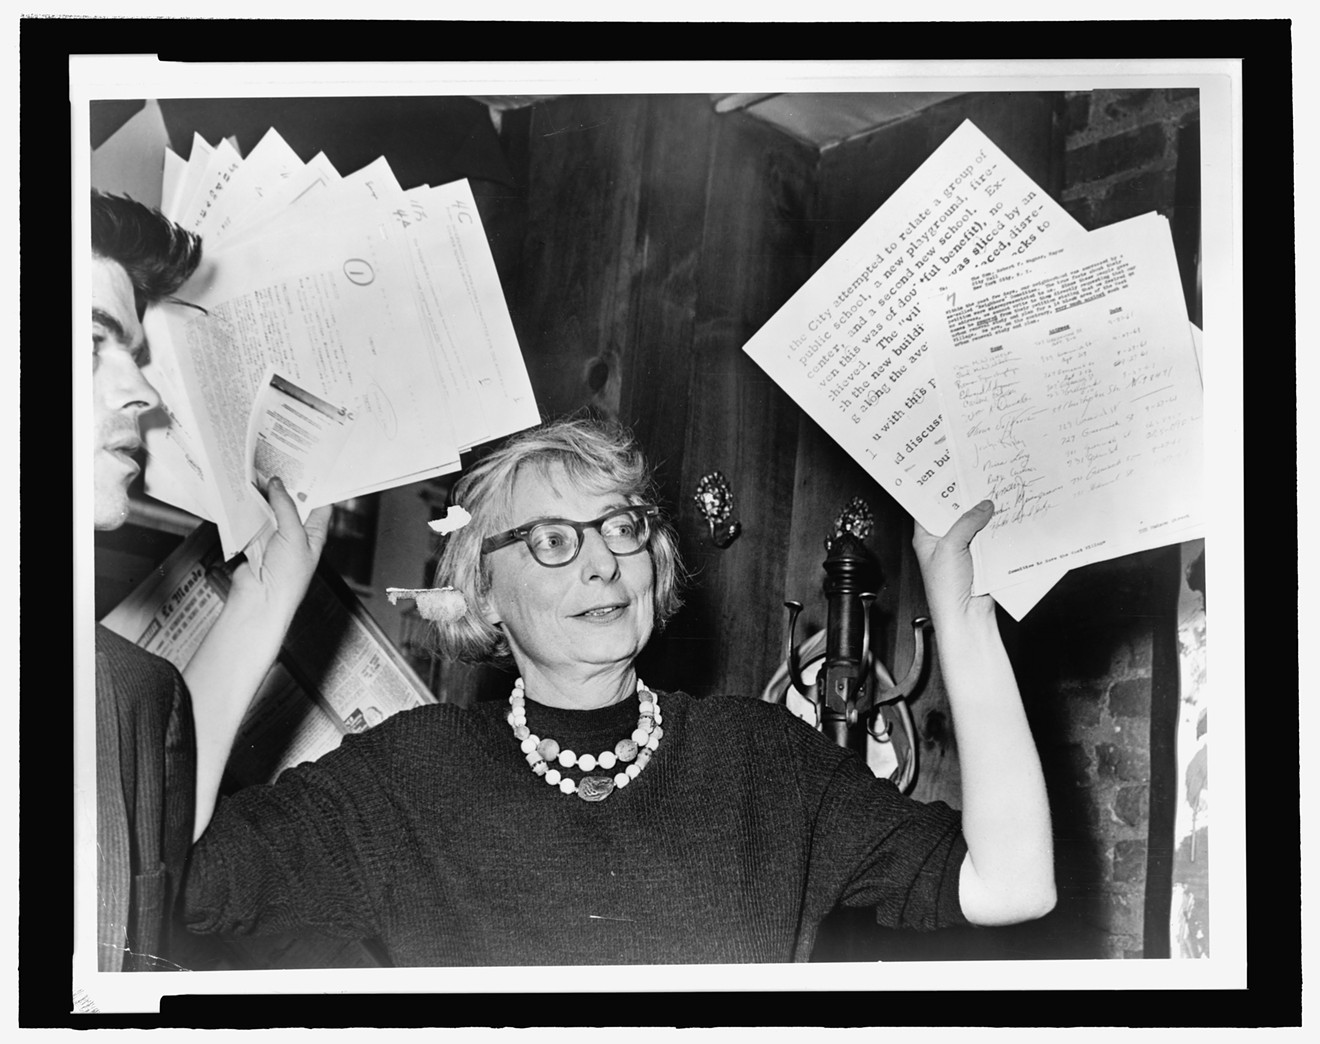 Jane Jacobs, showing her work.